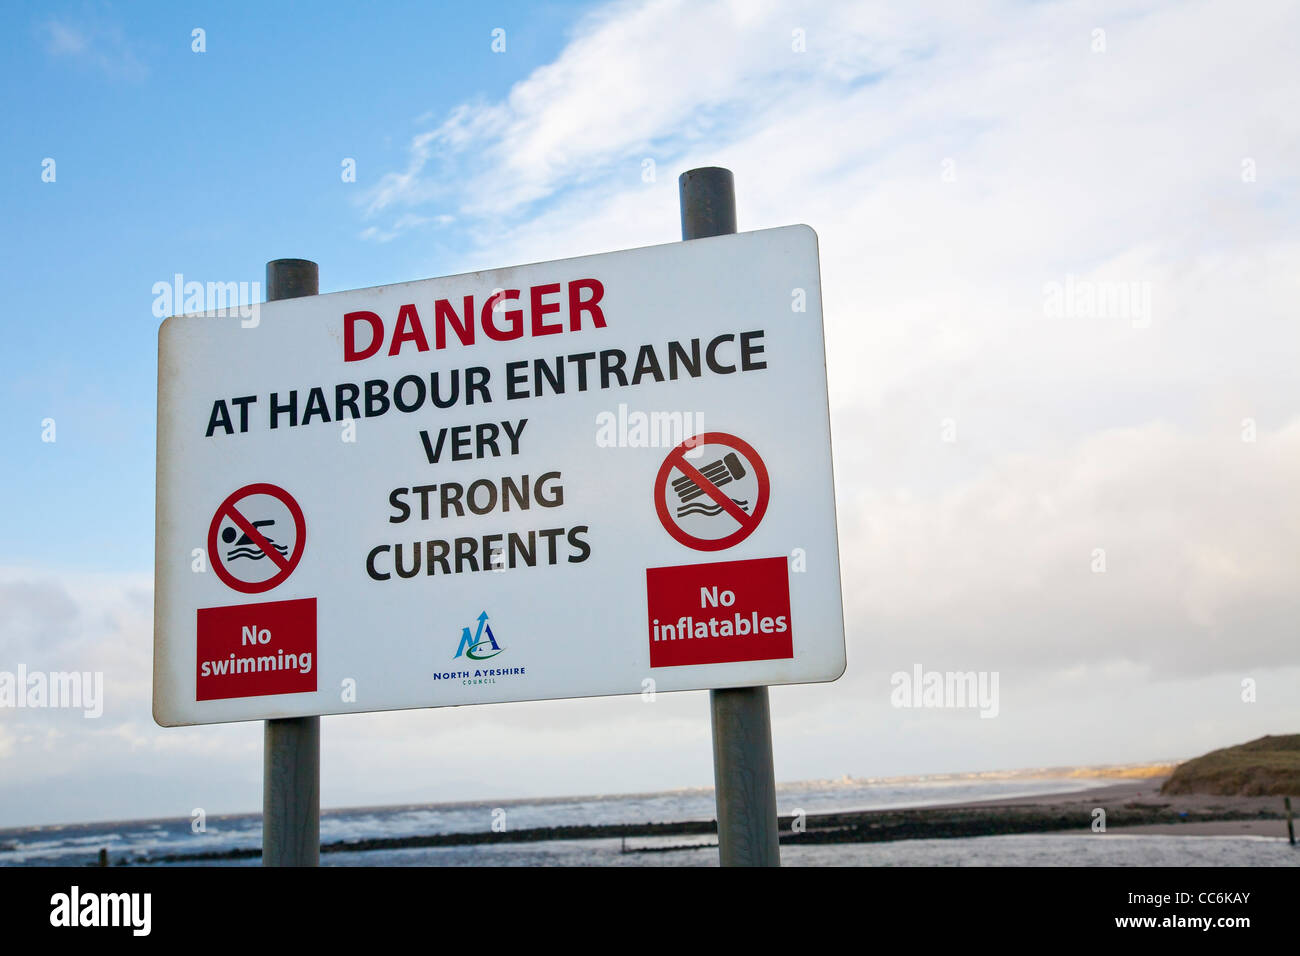 Danger sign warning of strong currents Stock Photo